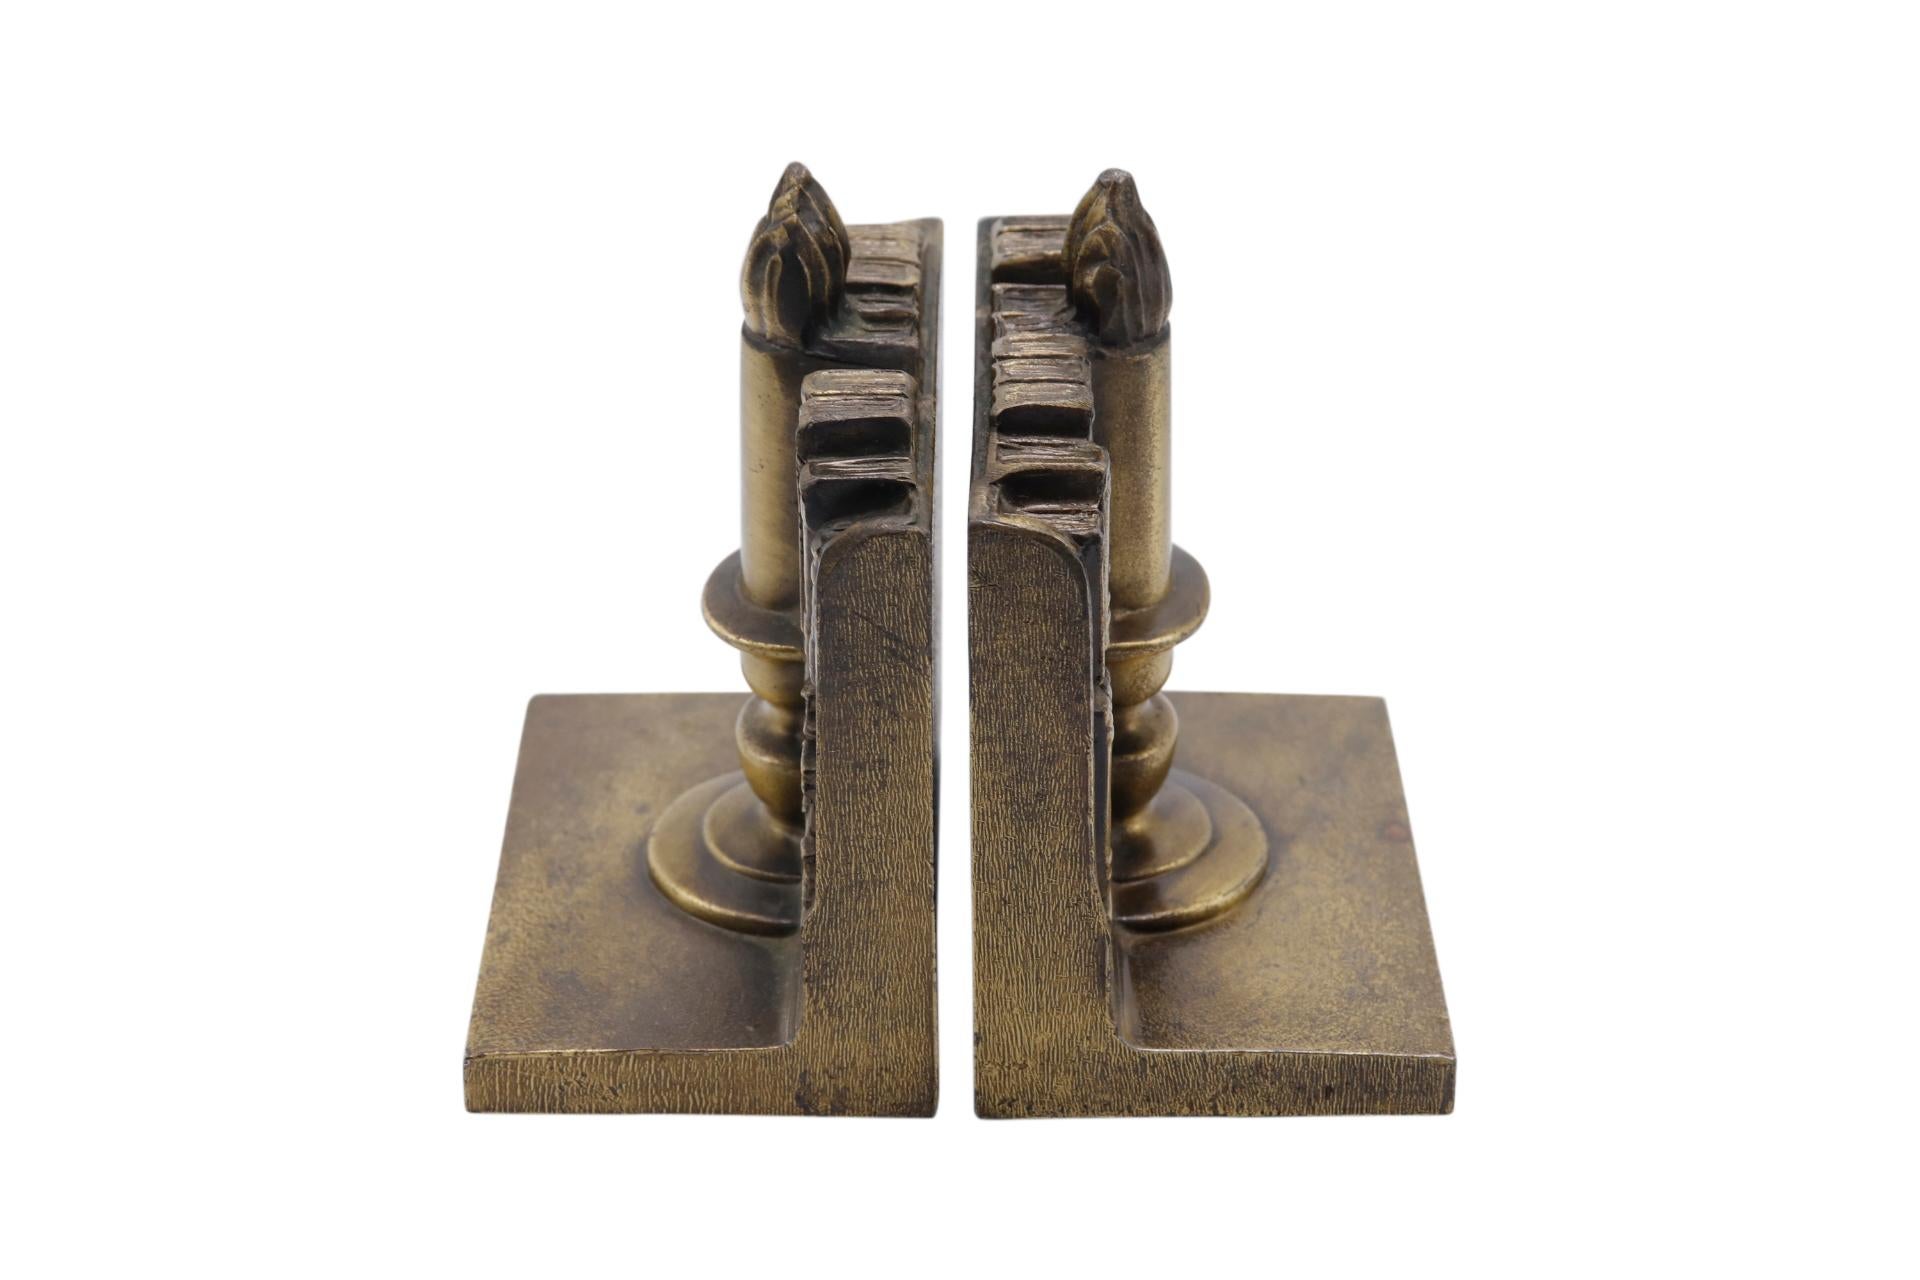 A pair of American made brass bookends cast in the shape of a candle stick in front of bookshelves. Underneath is finished with red felt. Makers label reads “A product of the finest American Craftsmanship. Philadelphia MFG Co. Philadelphia, PA.